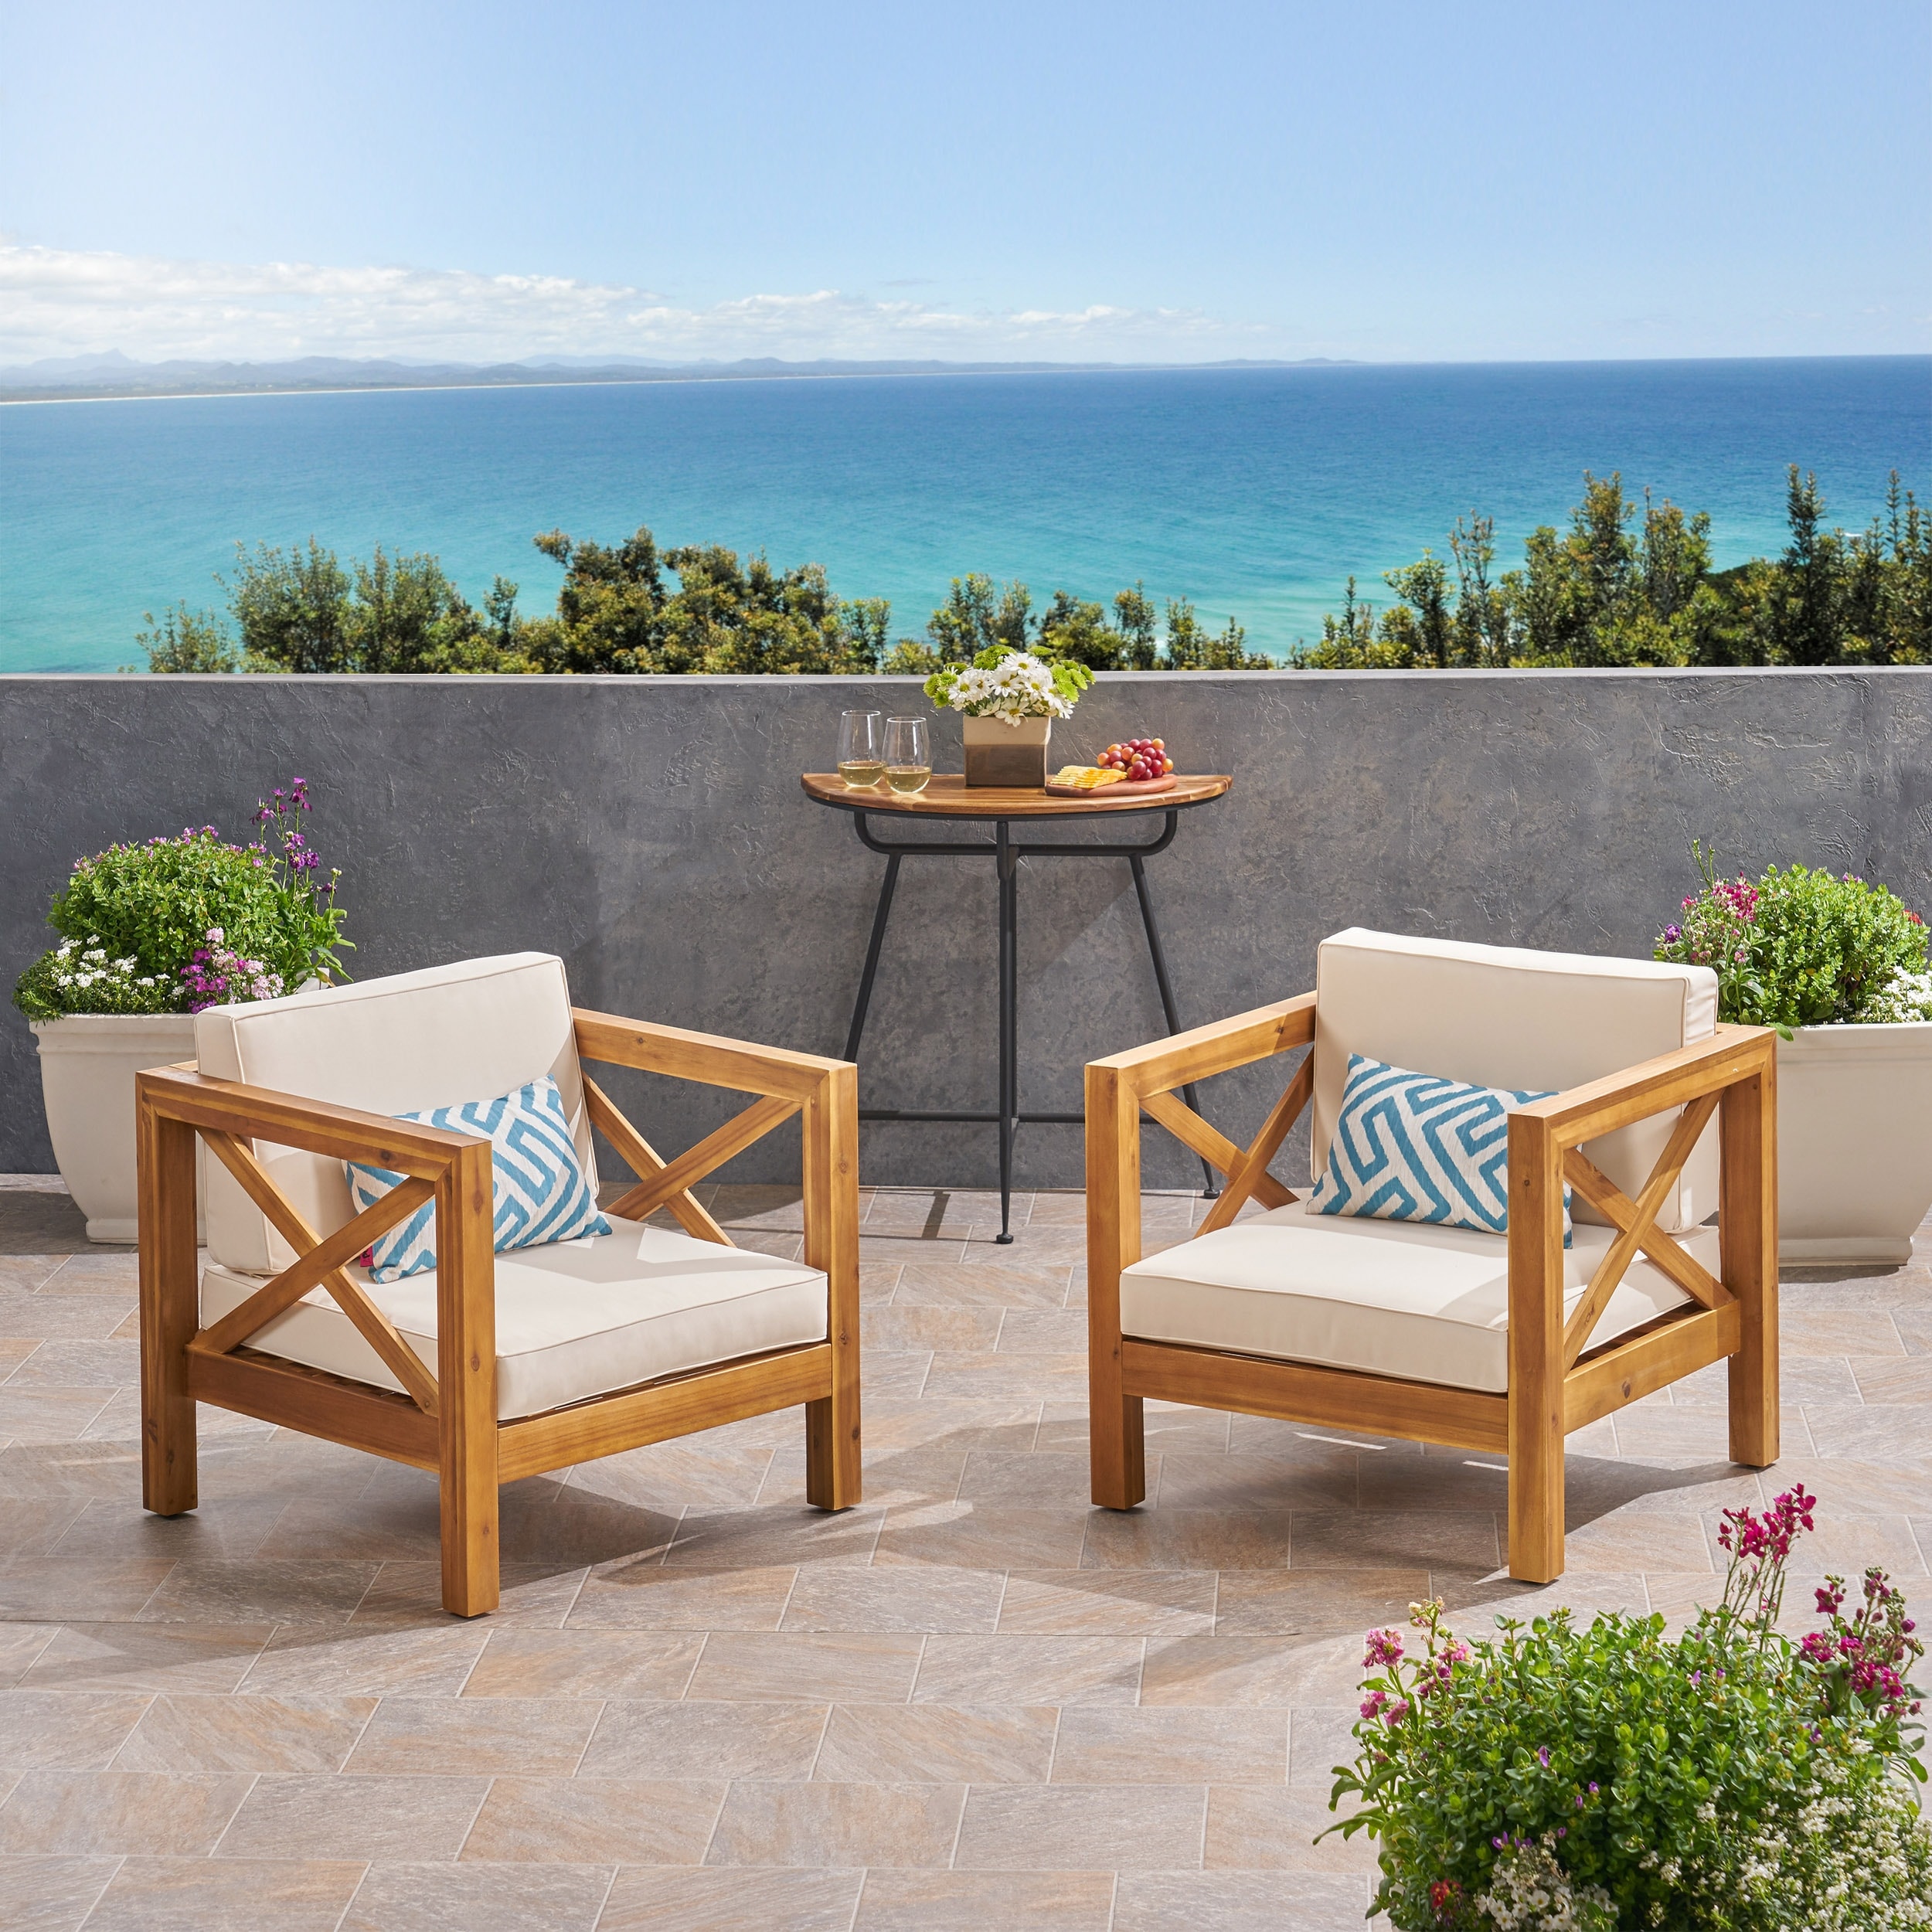 https://ak1.ostkcdn.com/images/products/is/images/direct/ee6d94ee3dc97cd5c14613e02effaa7a89a972c6/Brava-Outdoor-Acacia-Wood-Club-Chairs-with-Cushions-%28Set-of-2%29-by-Christopher-Knight-Home.jpg